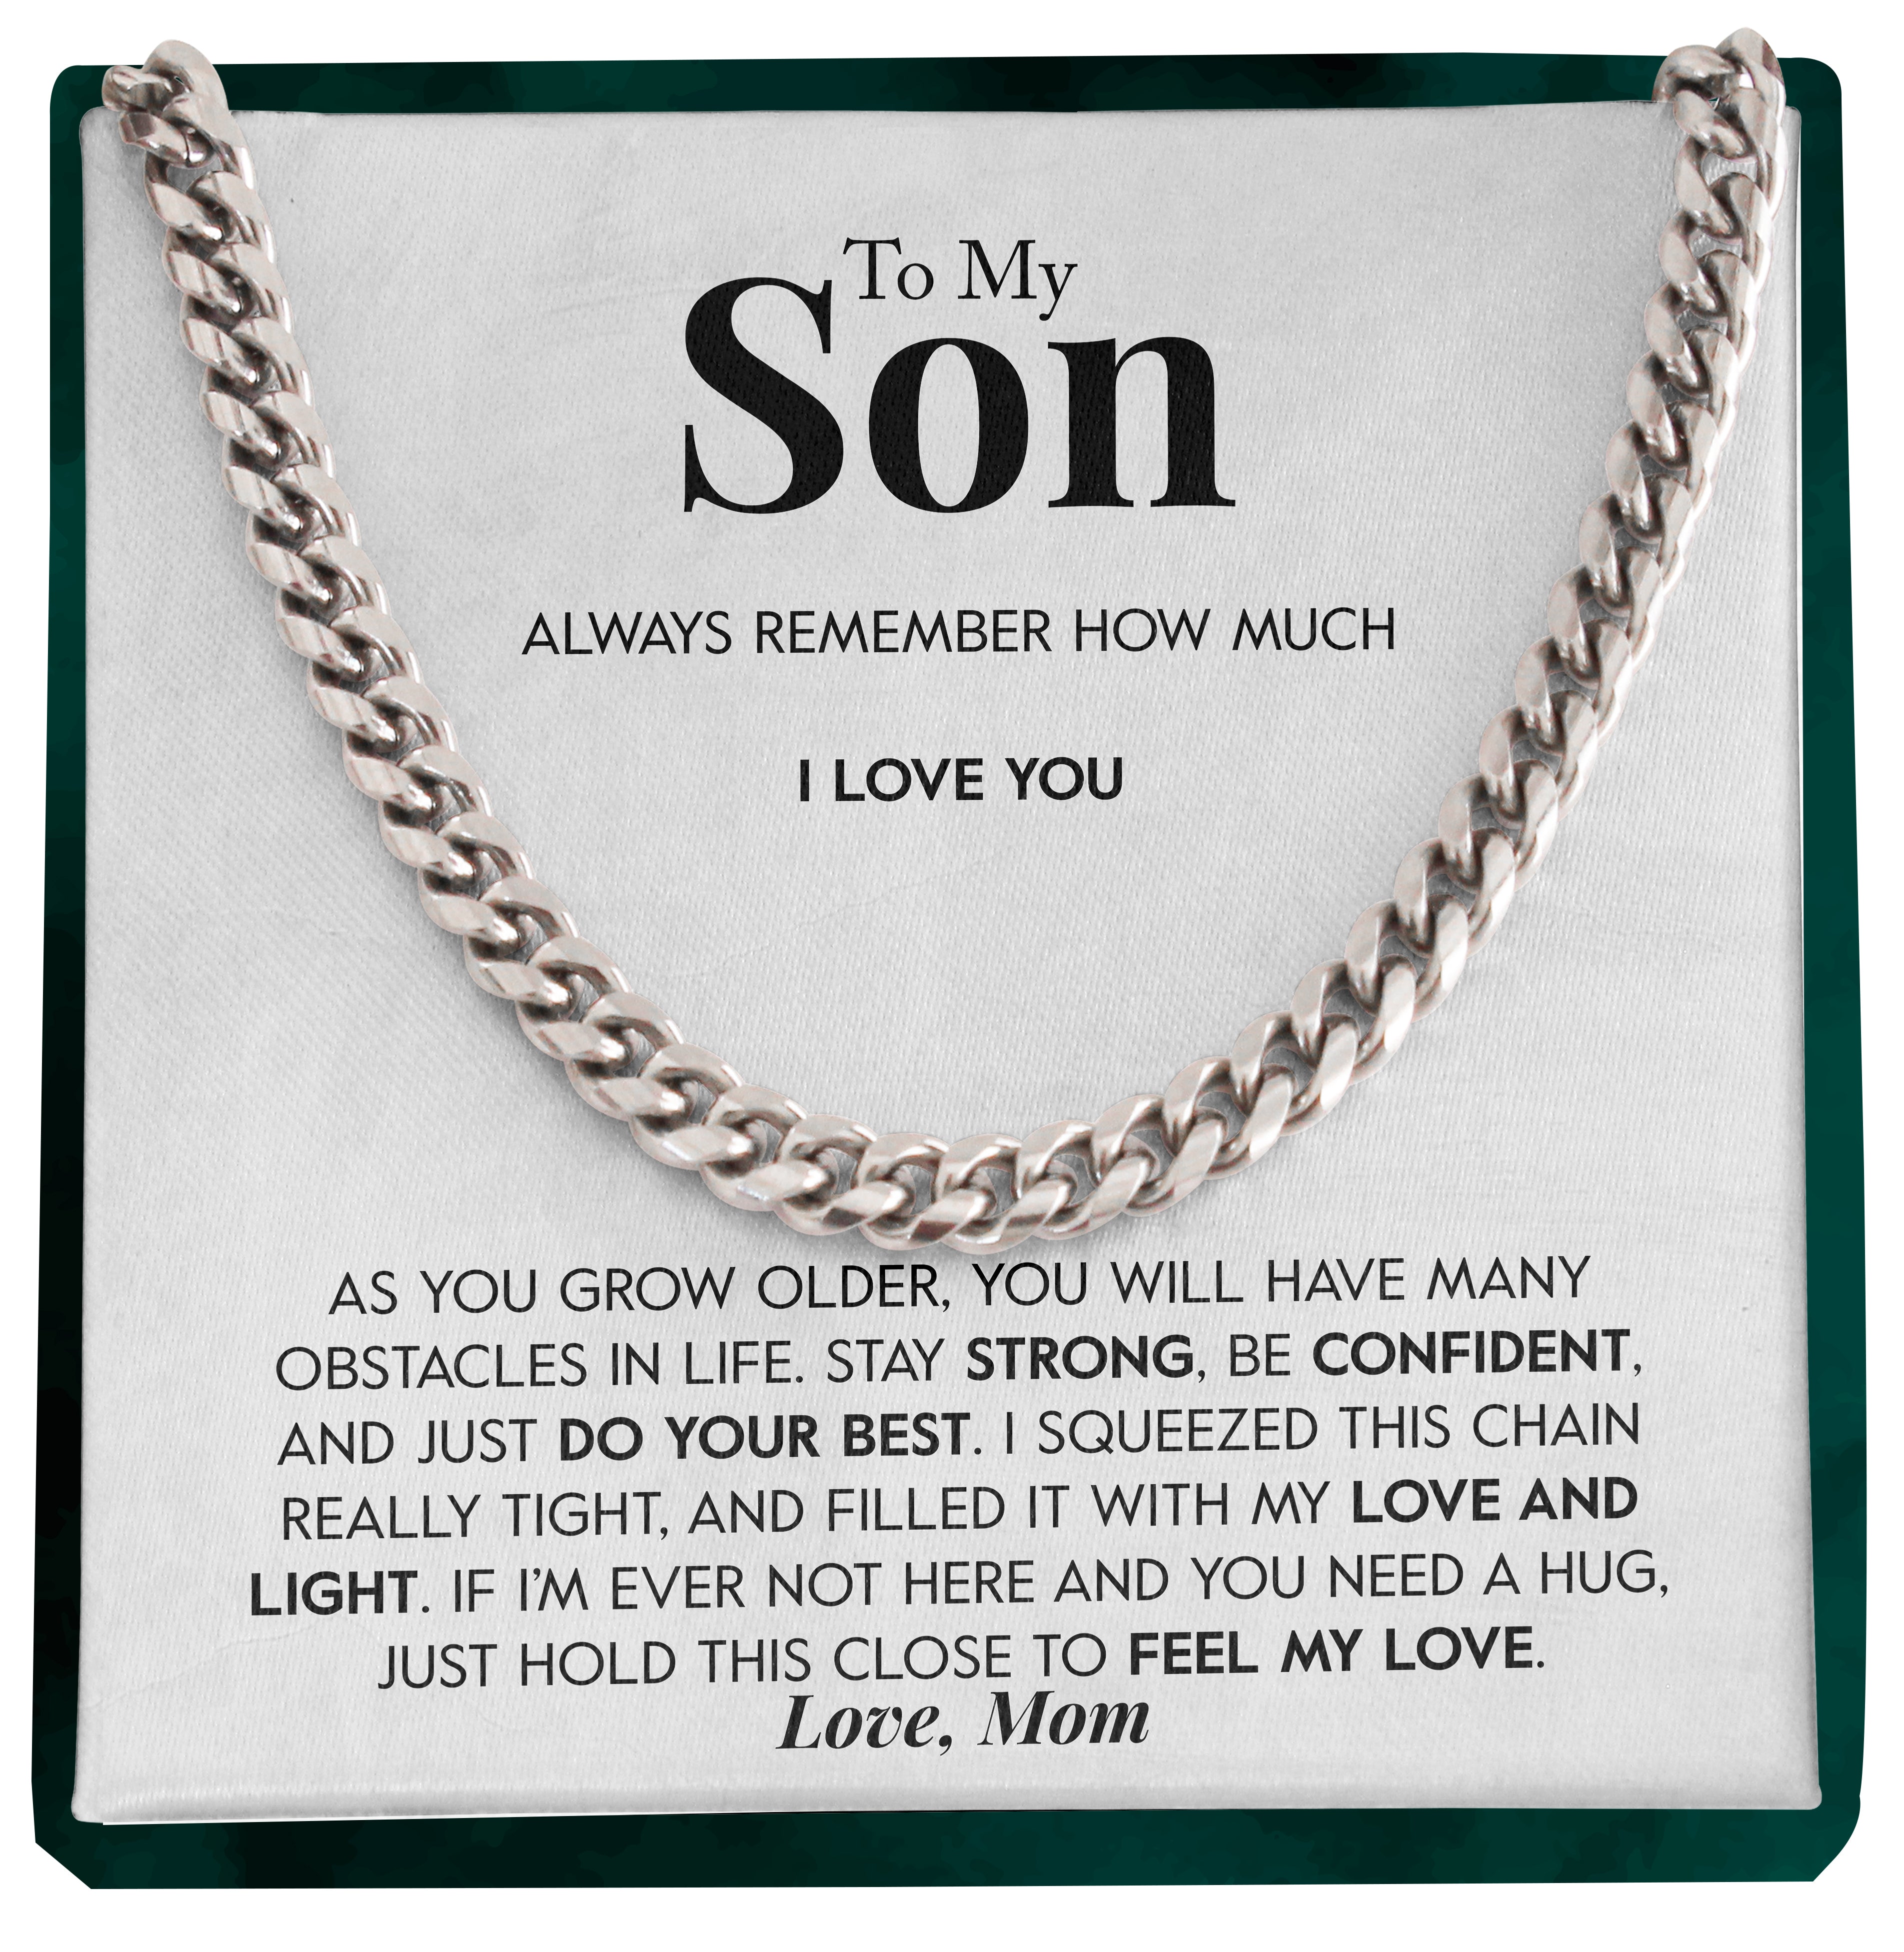 To My Son | "Always Remember" | Cuban Chain Link